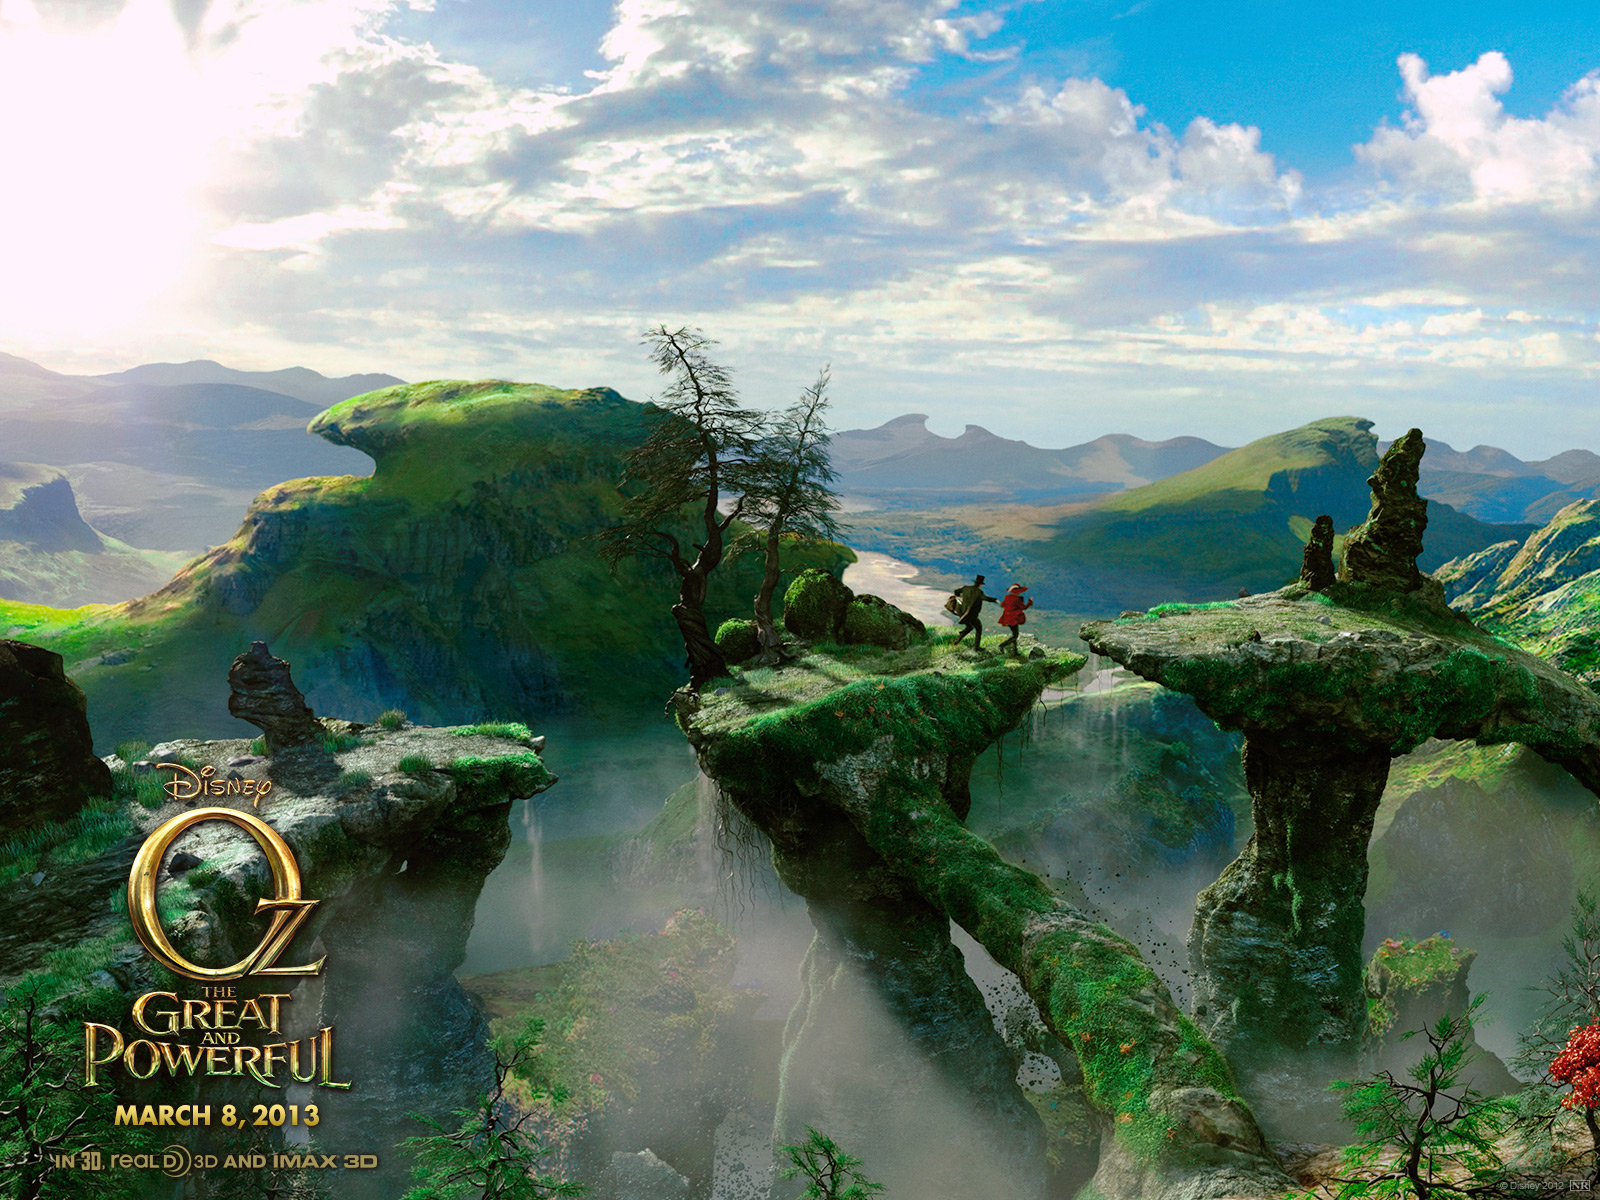 Download HQ Oz The Great and Powerful wallpaper / Movies / 1600x1200